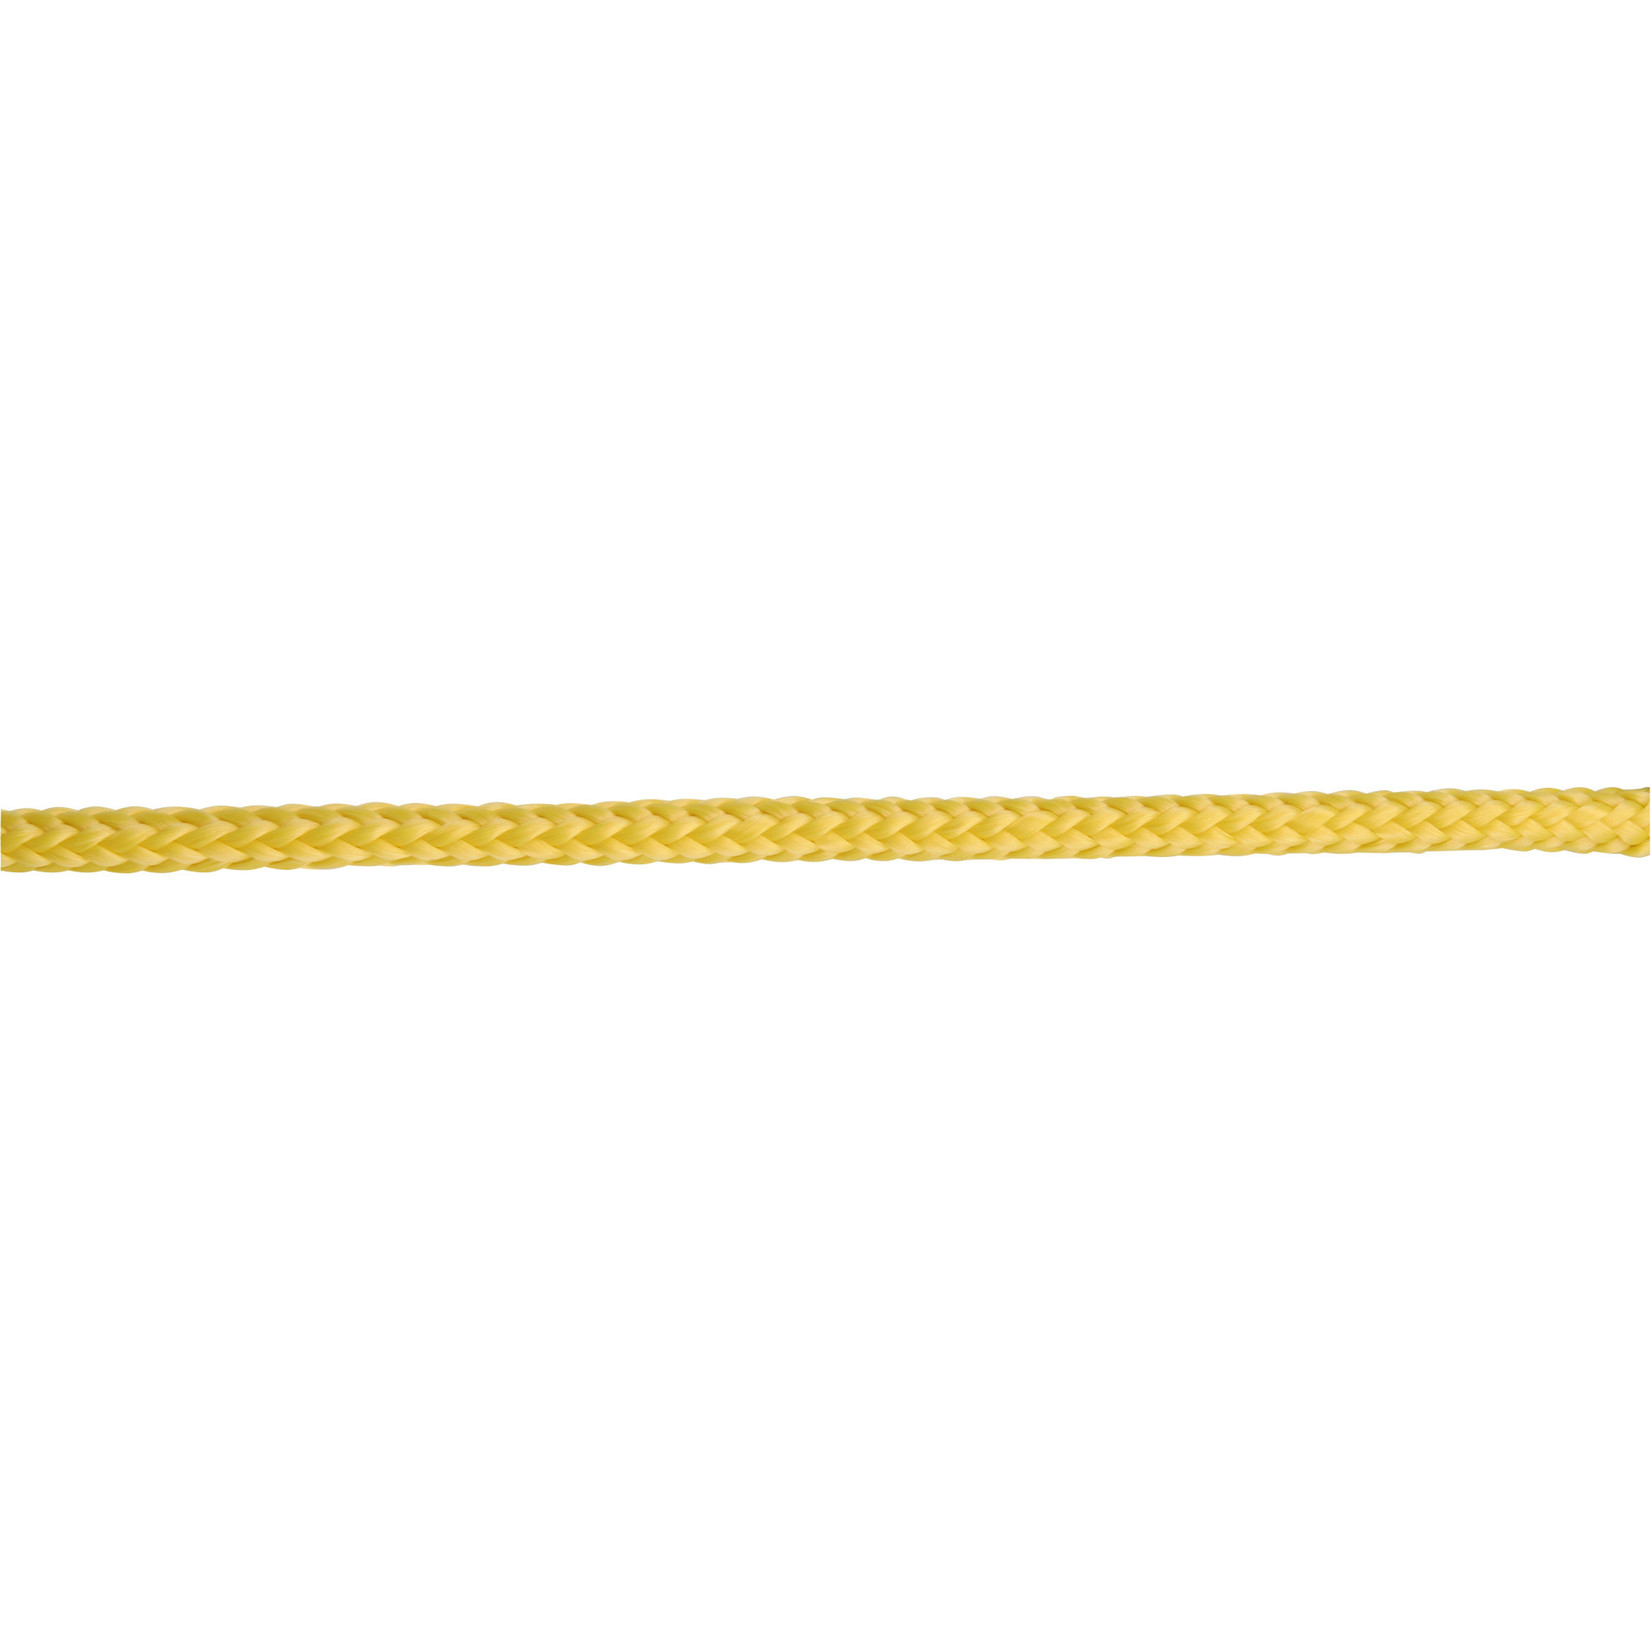 NRS NRS Rescue Rope 3/8"